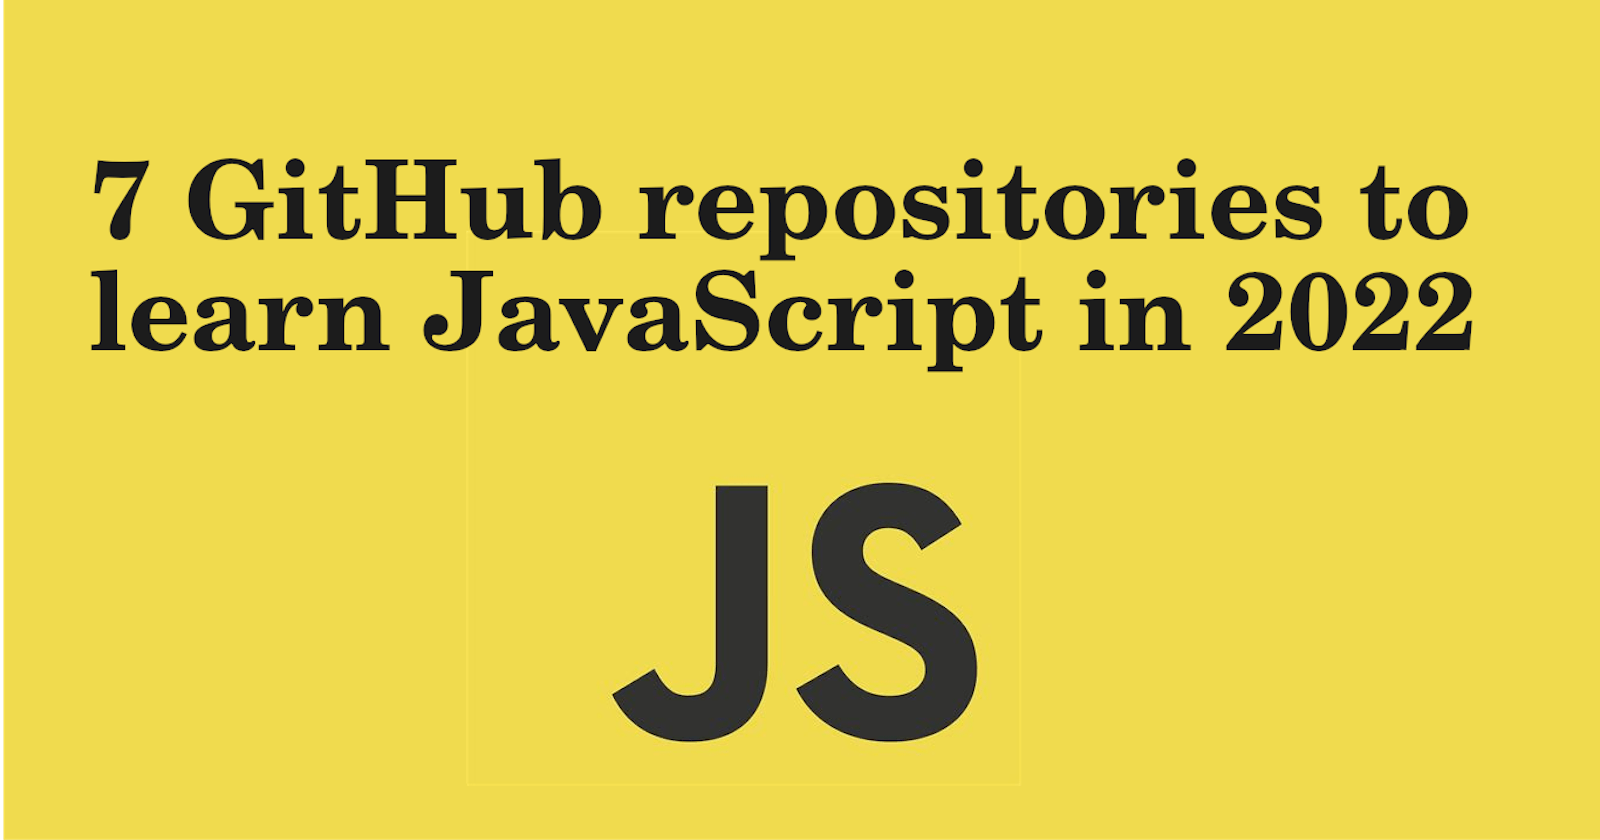 7 GitHub repositories to learn JavaScript in 2022